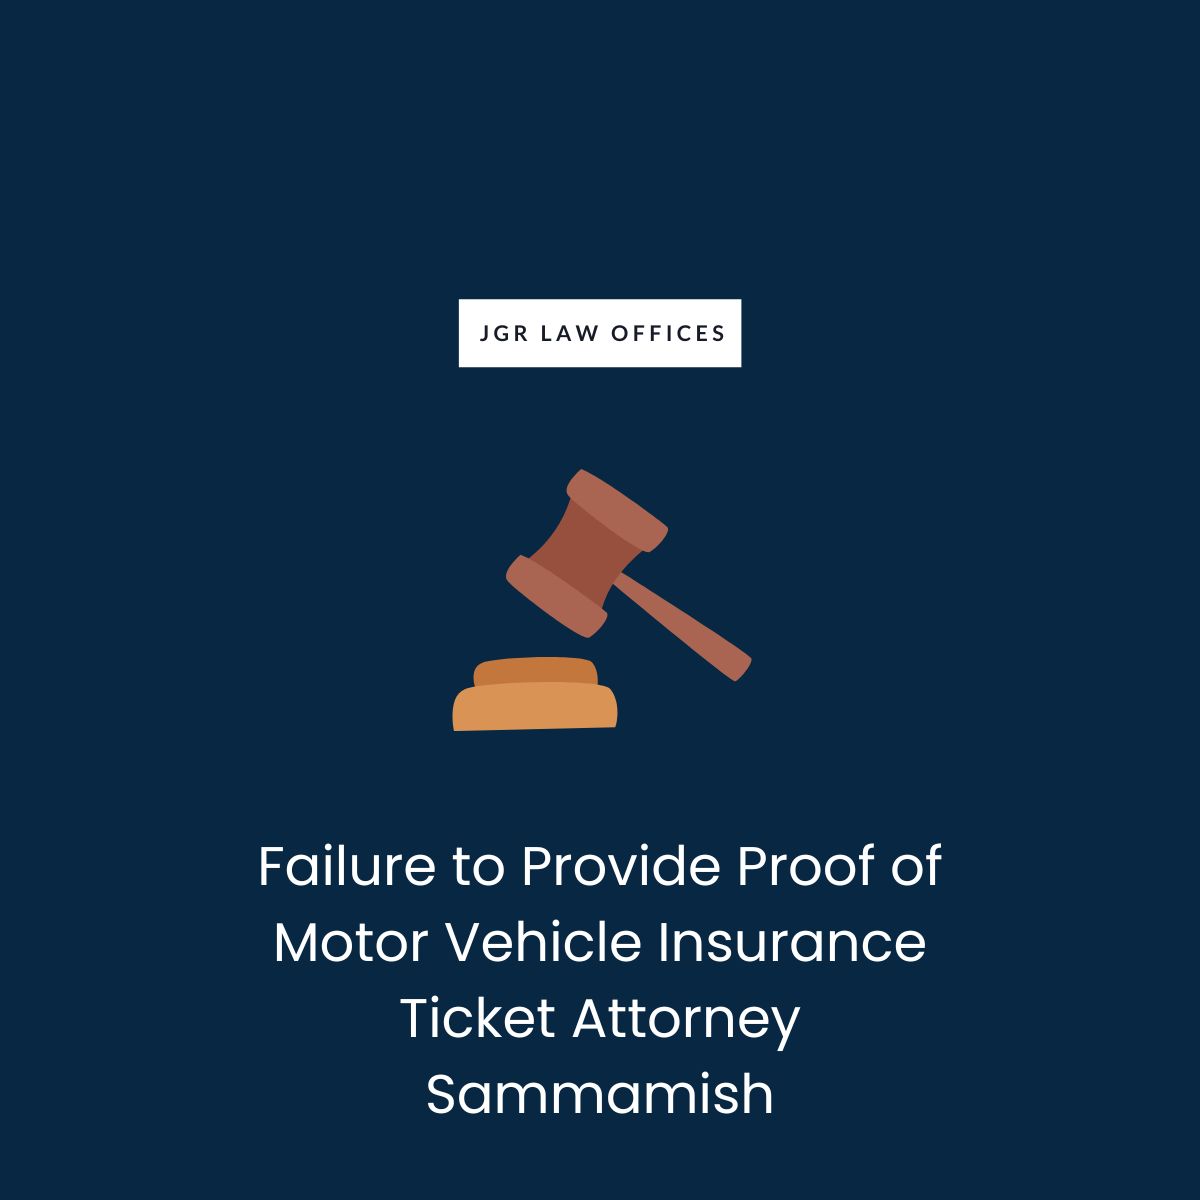 Failure to Provide Proof of Motor Vehicle Insurance Ticket Attorney Sammamish